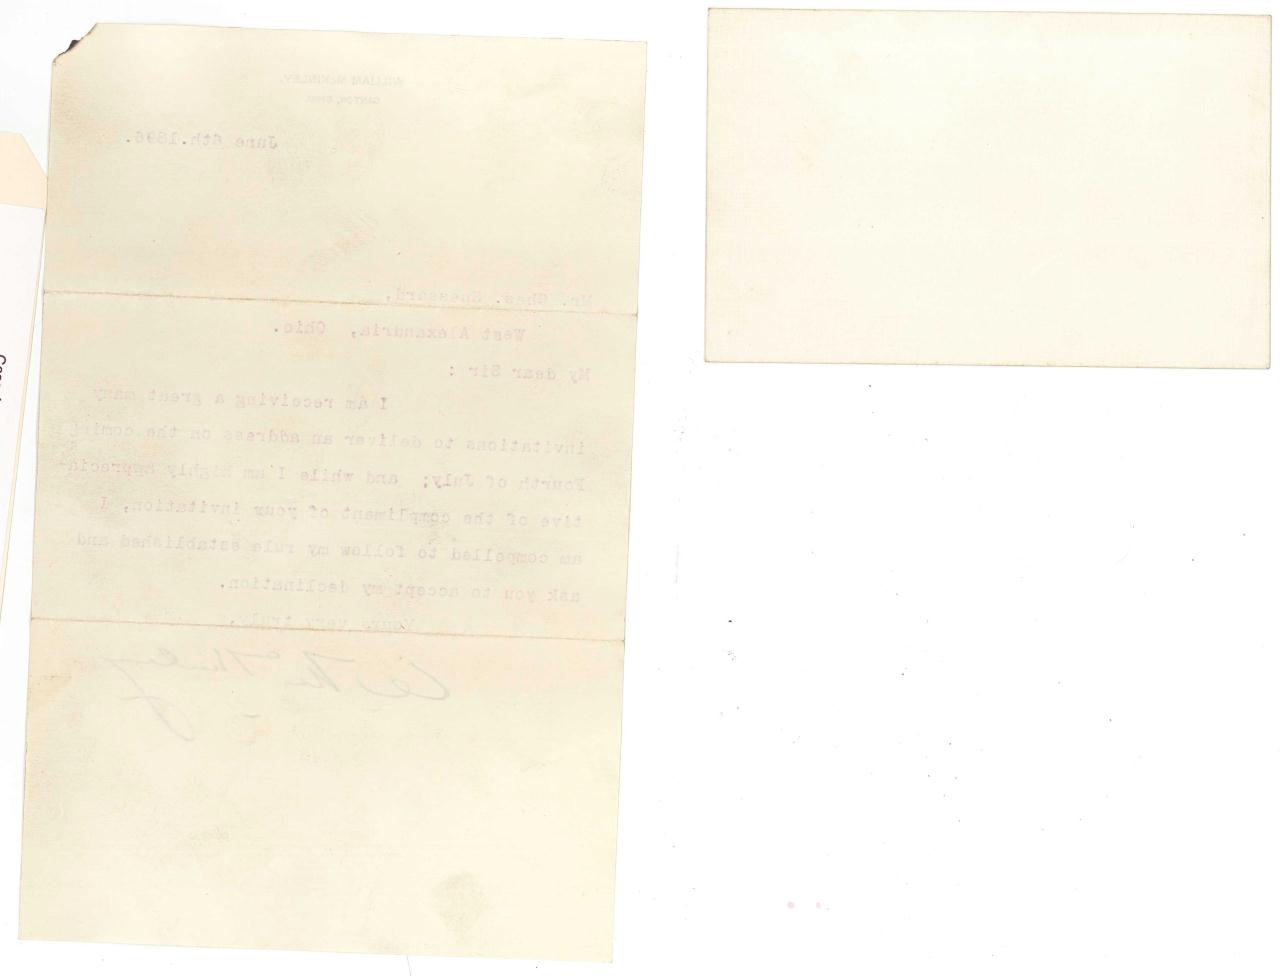 Lot 354: 2 Presidential Sgd Documents, Taft and McKinley